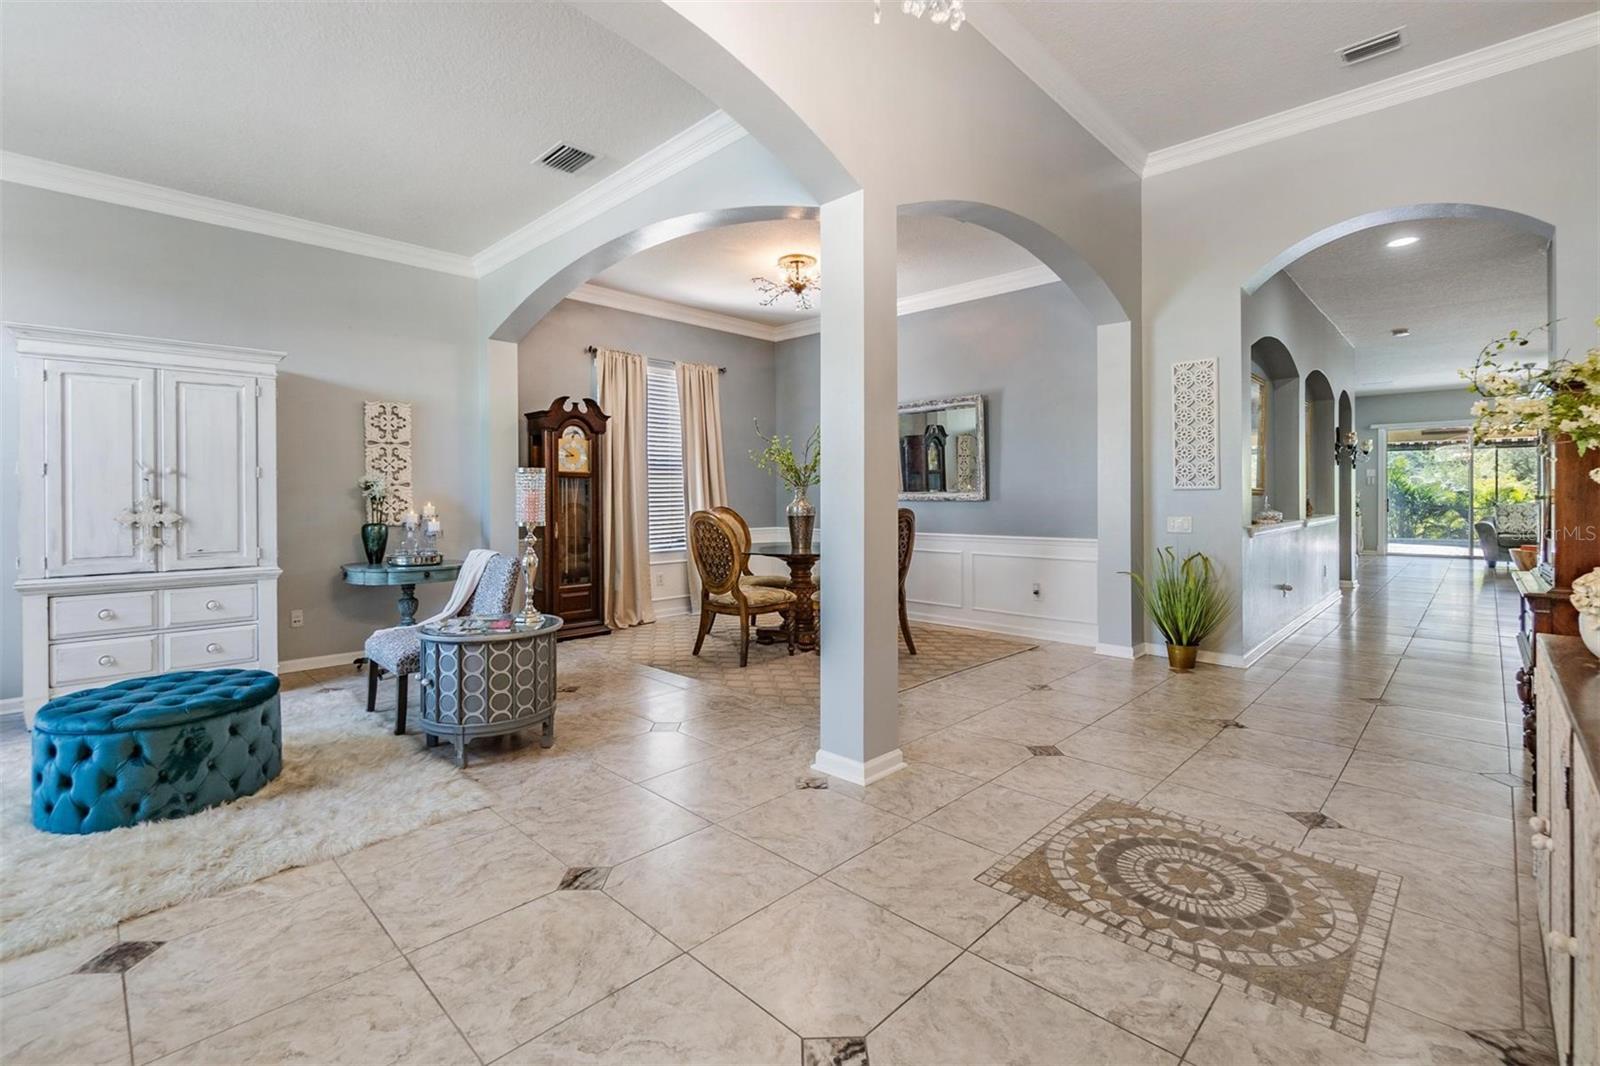 Living Room and Dining Room, Open Floor Plan, Tile Flooring and Large Entryway.